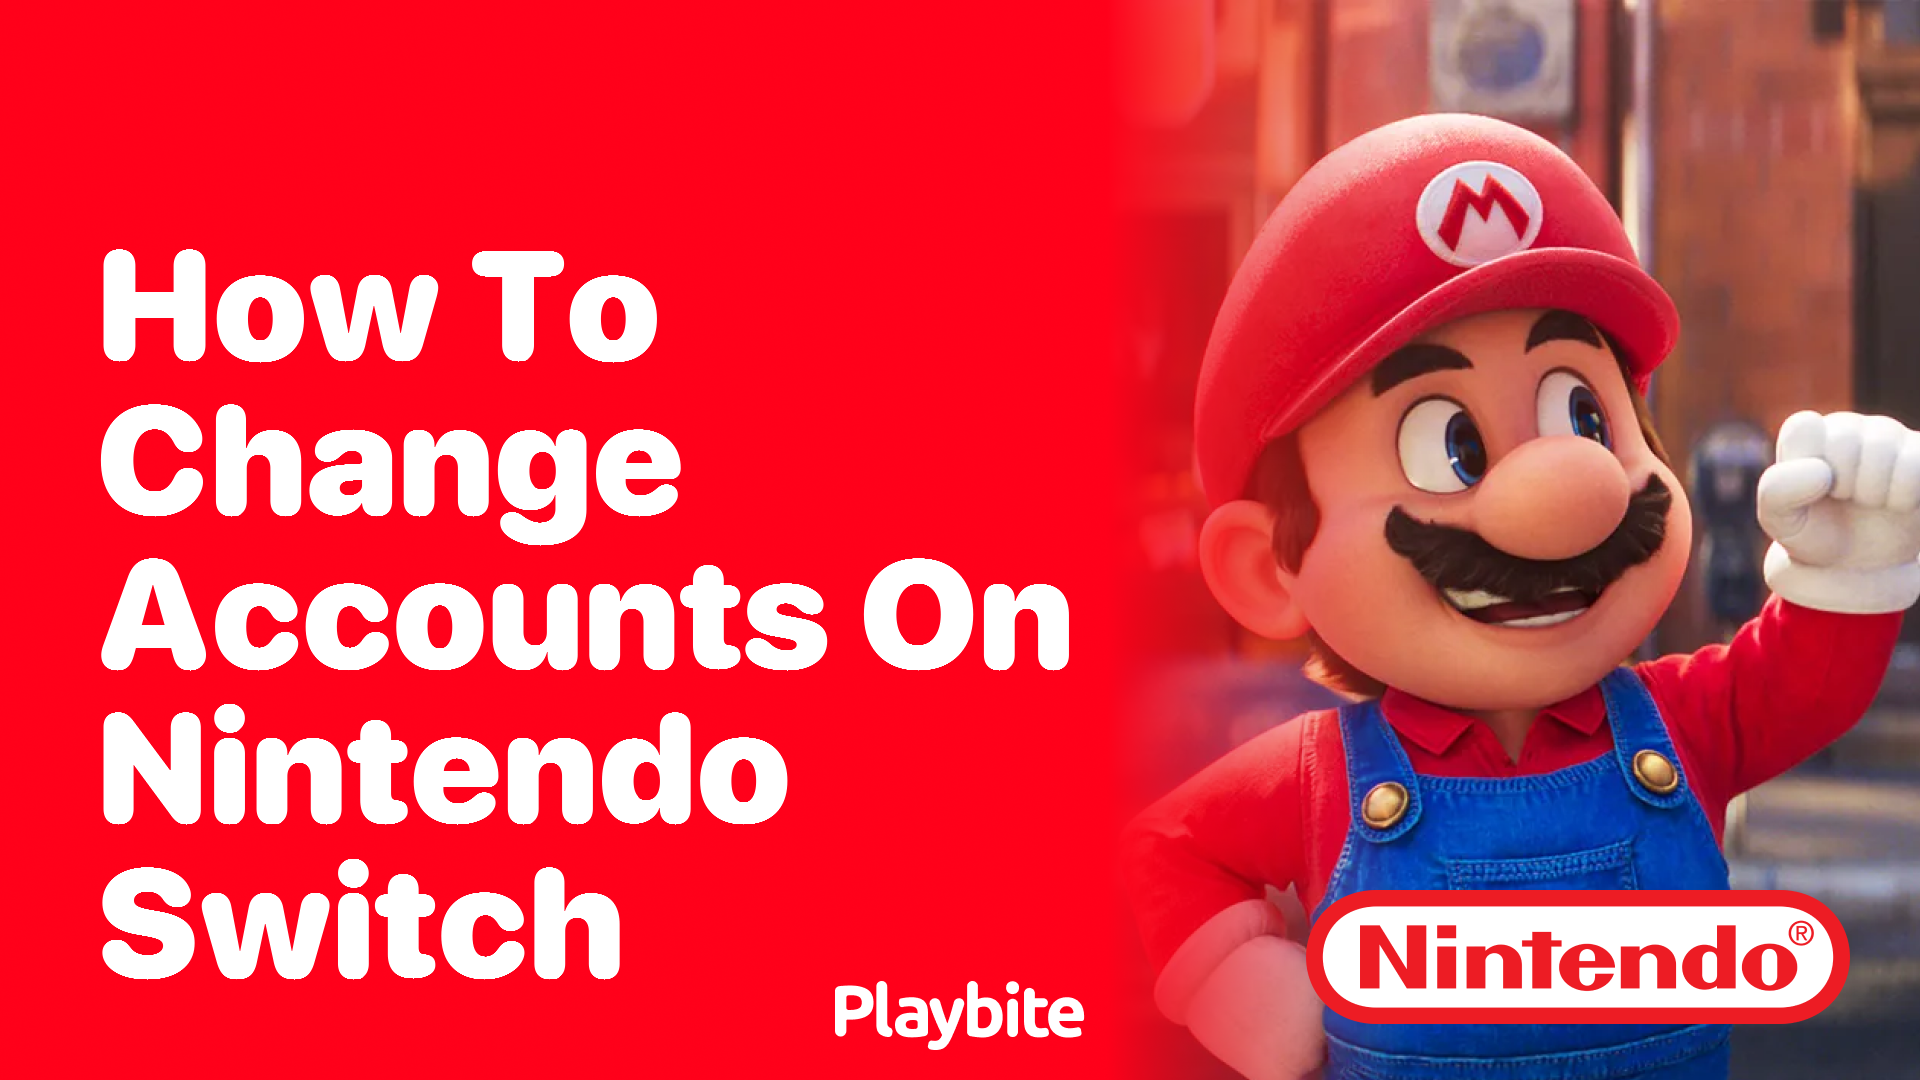 How to Change Accounts on Your Nintendo Switch